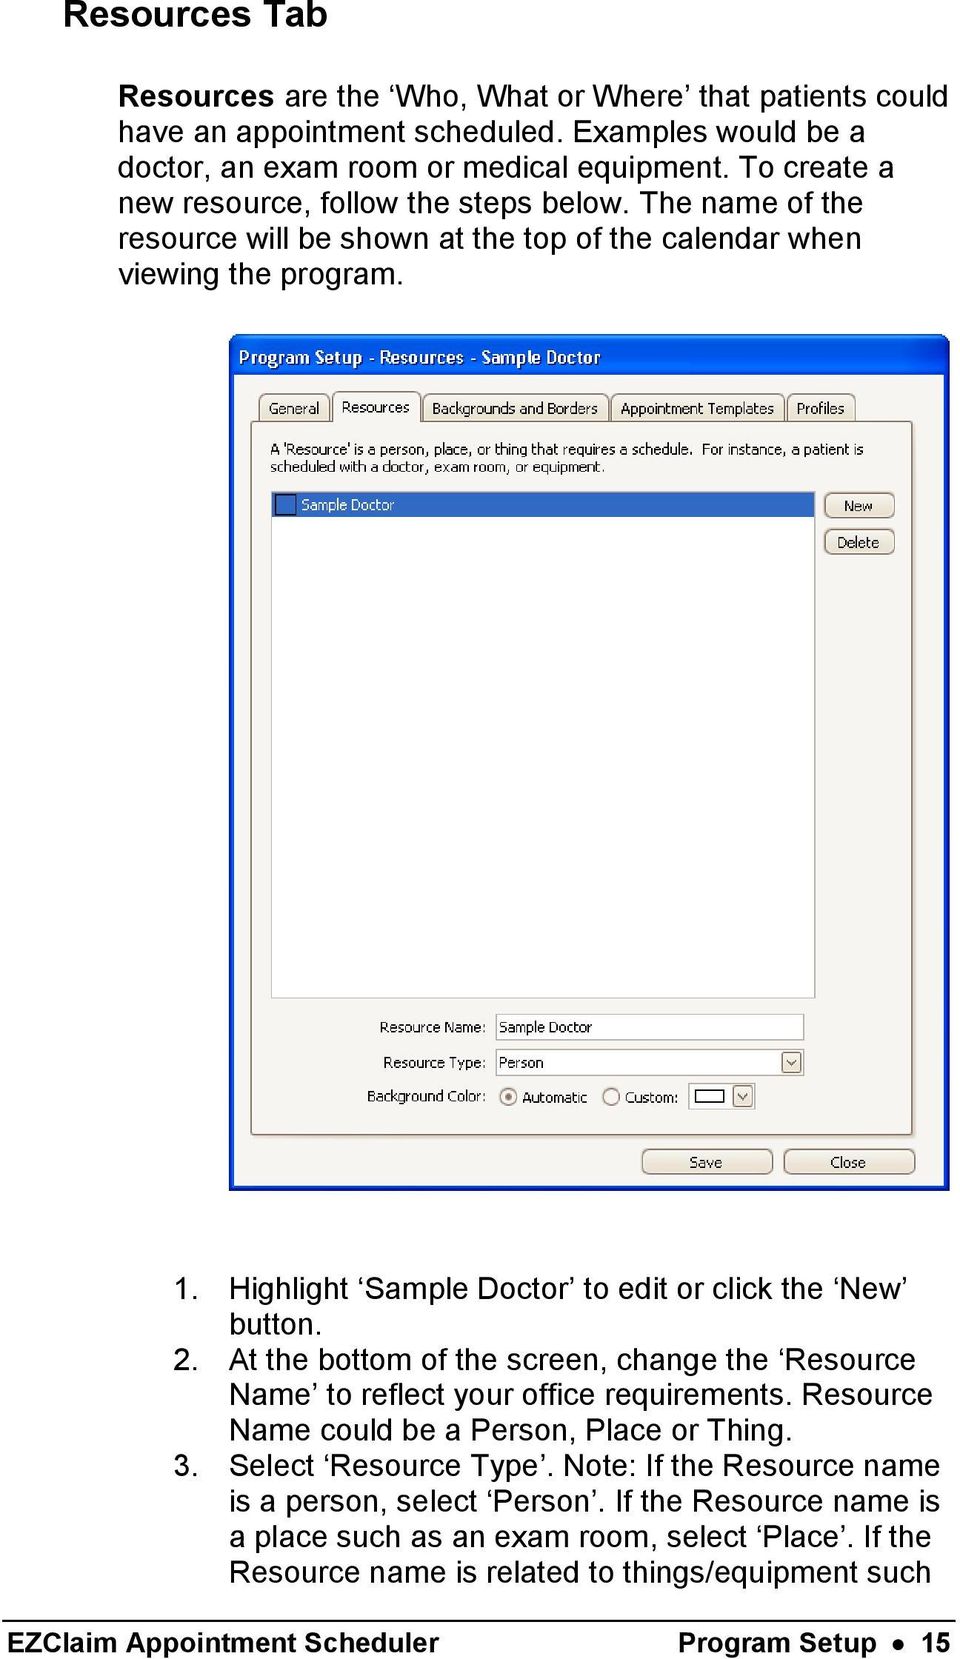 Highlight Sample Doctor to edit or click the New button. 2. At the bottom of the screen, change the Resource Name to reflect your office requirements.